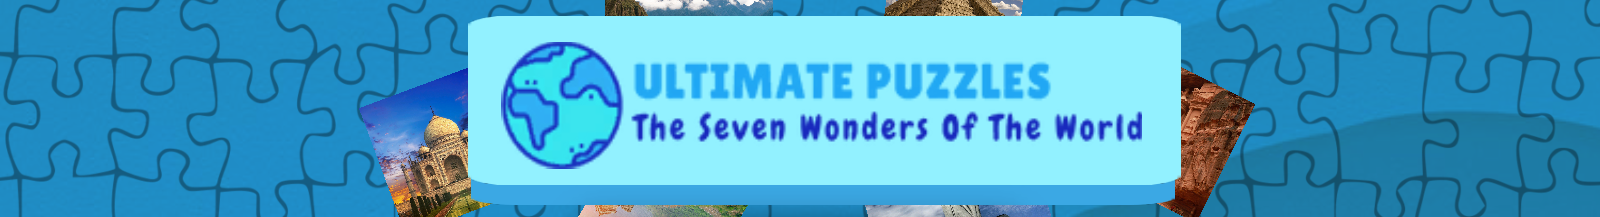 Ultimate Puzzles The 7 Wonders